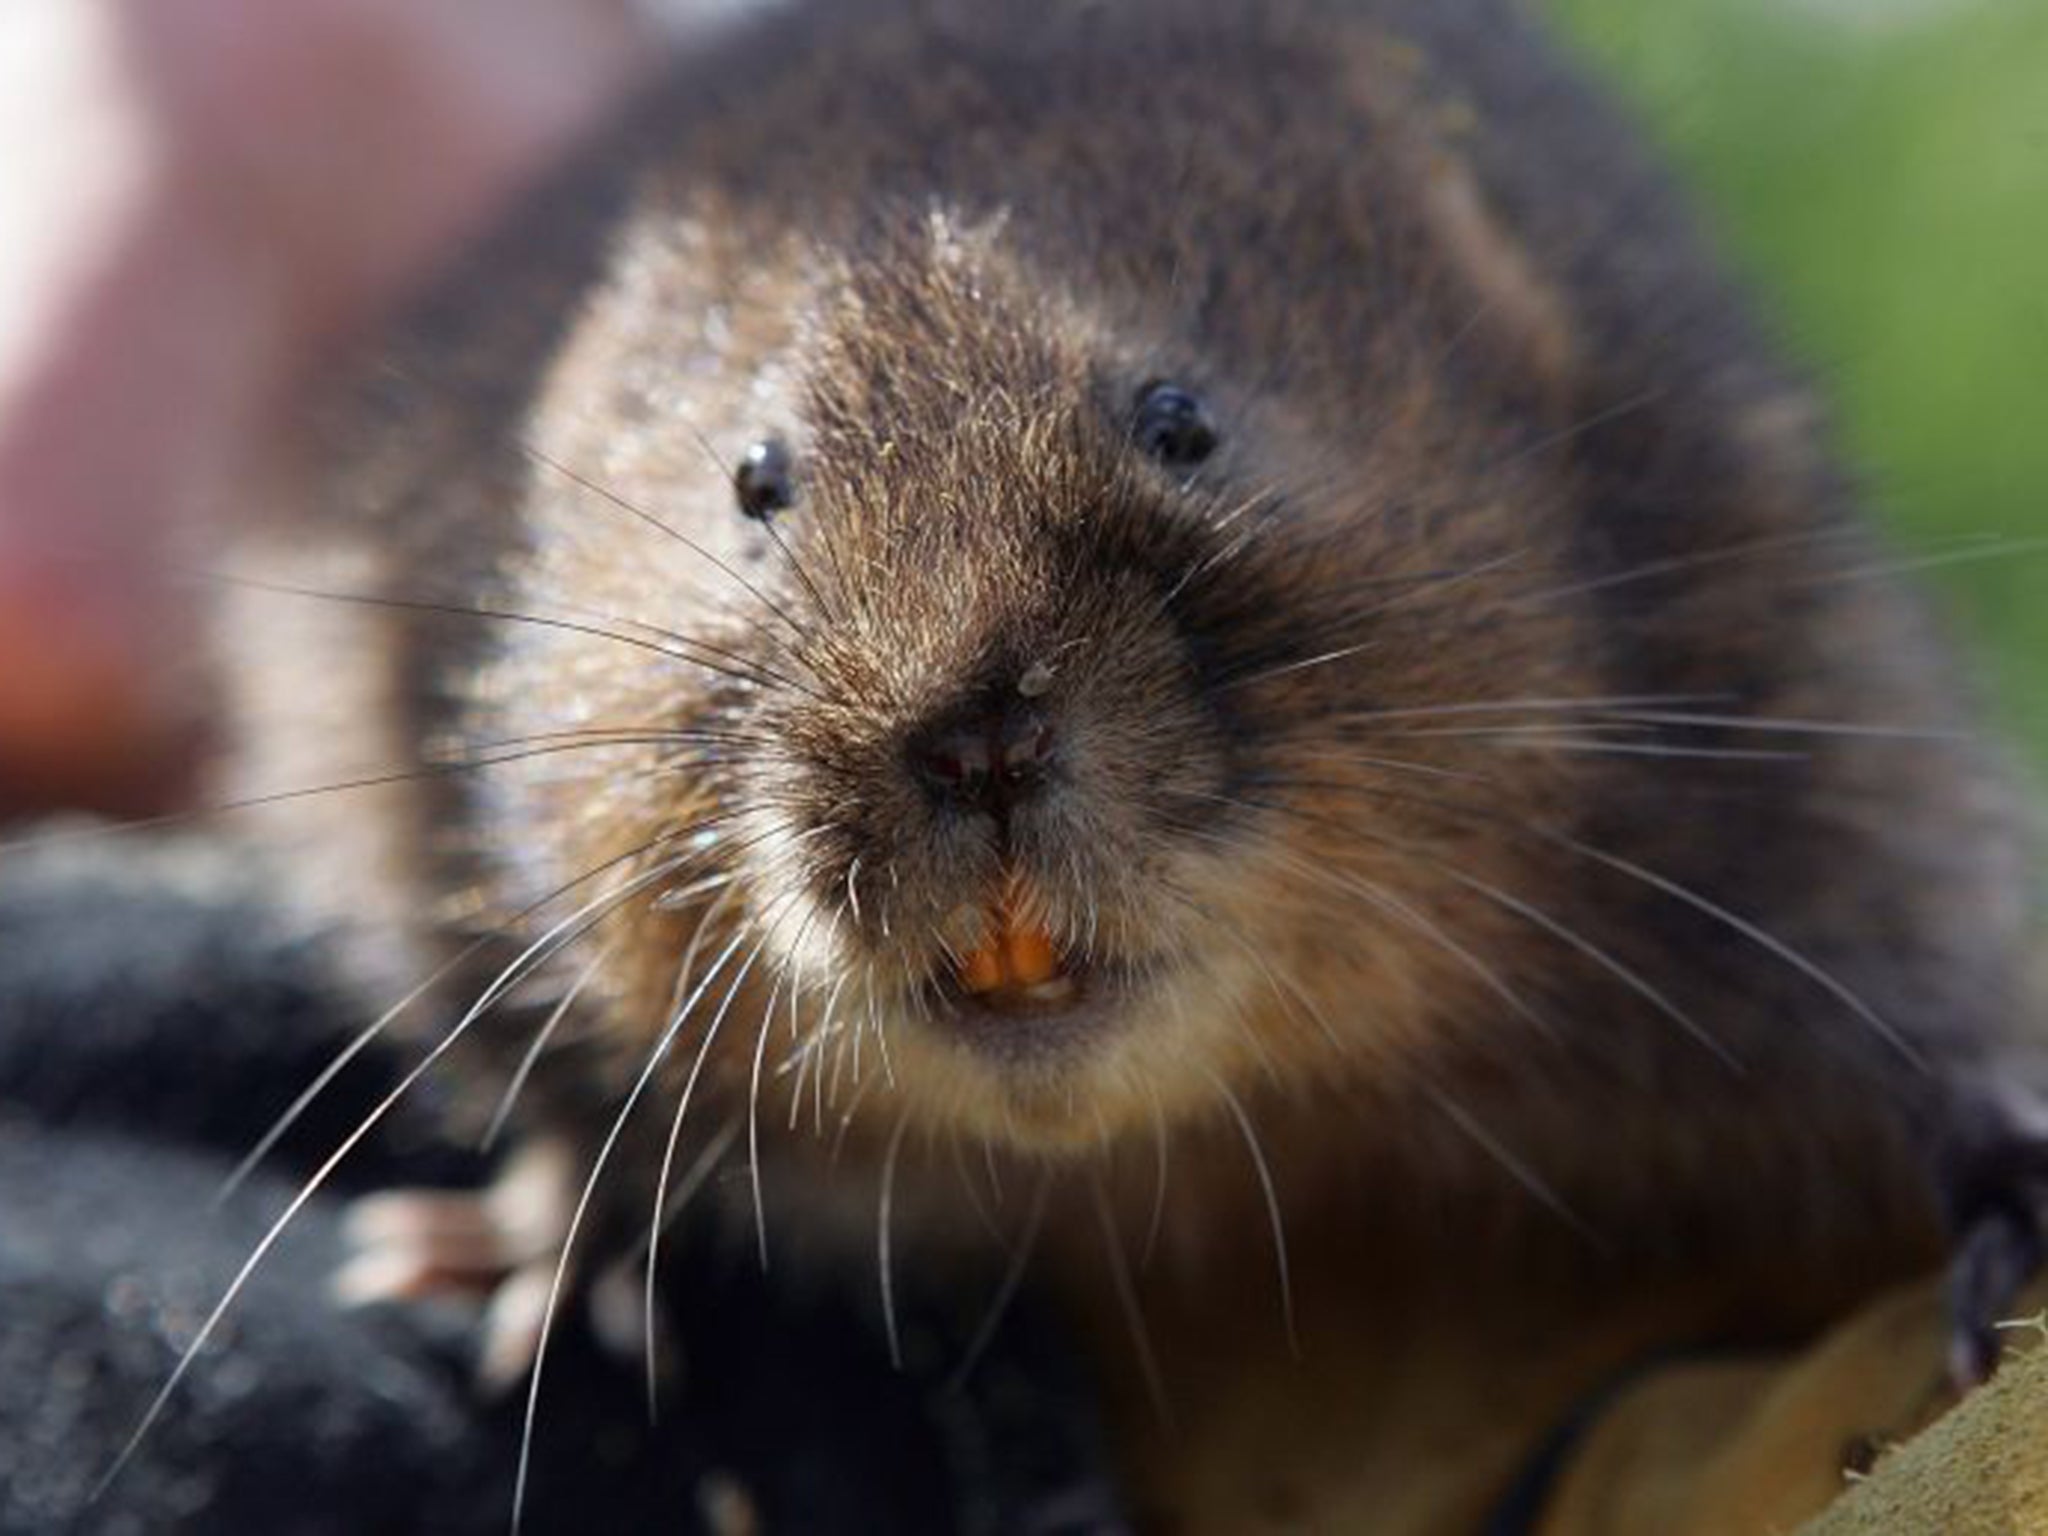 Their size and colour mean that voles are often mistaken for rats